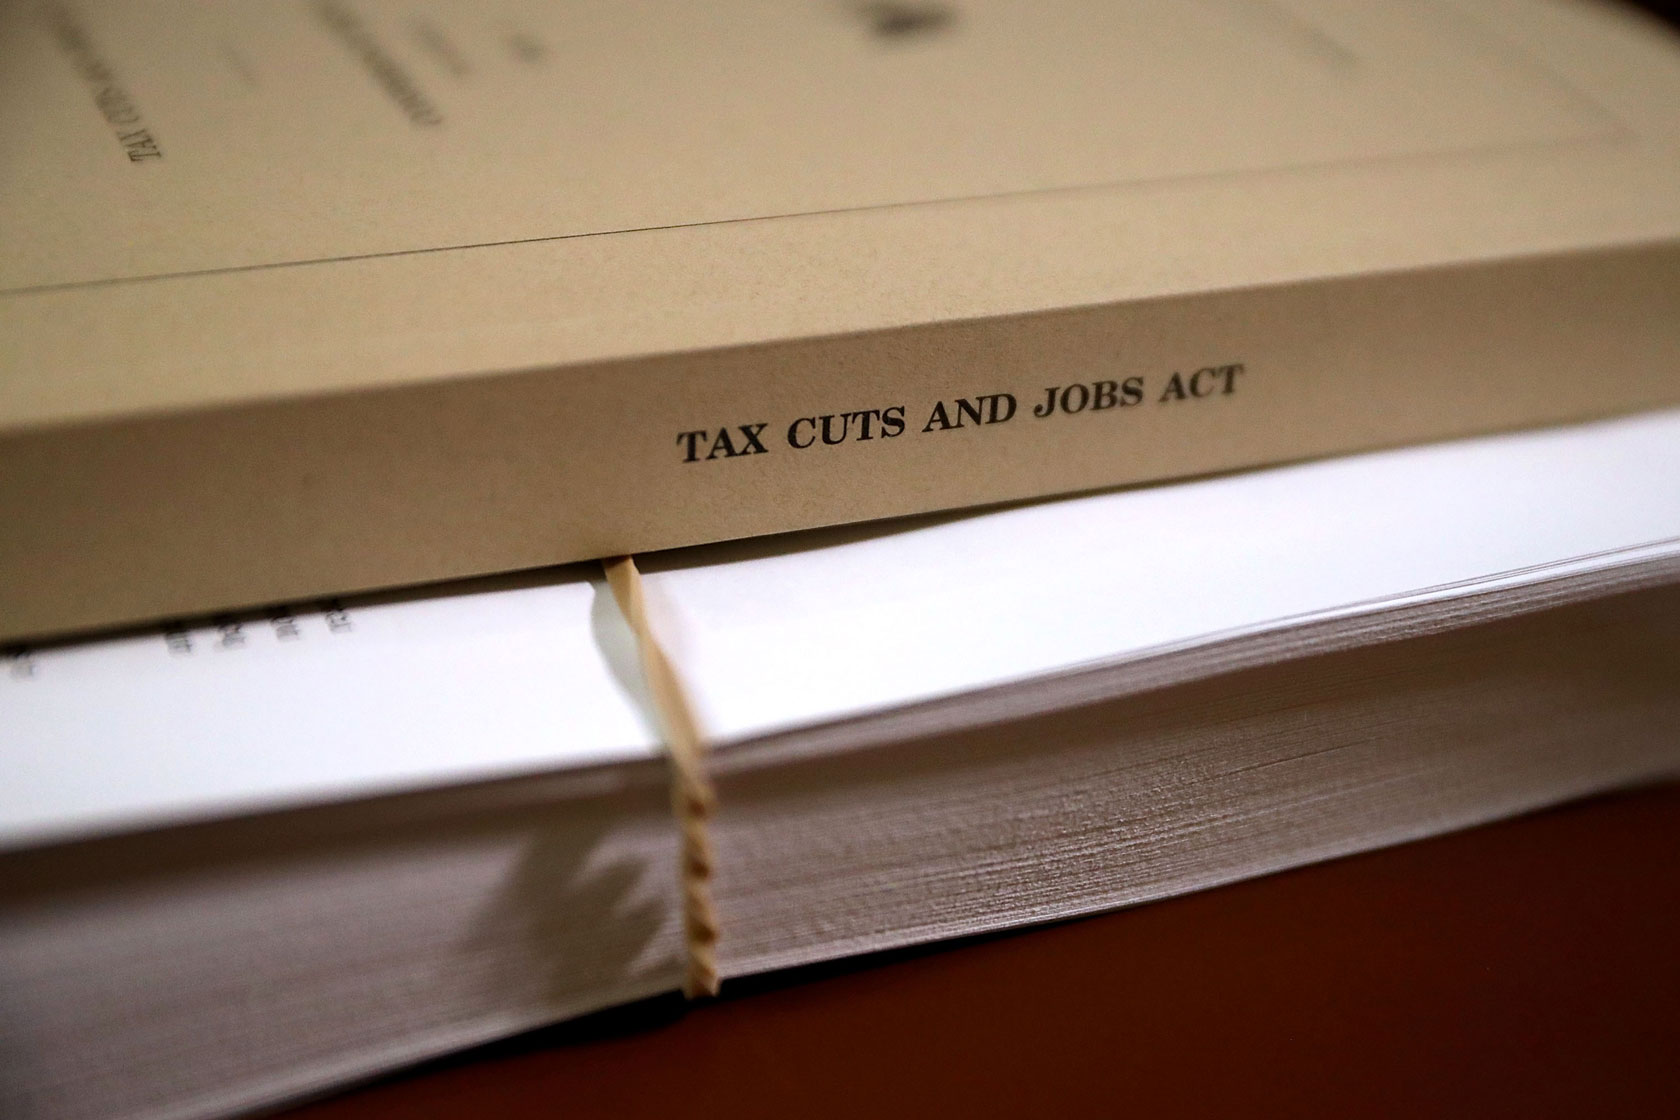 Photo shows a bound copy of the Tax Cuts and Jobs Report conference report atop a stack of loose papers held together with a rubber band.